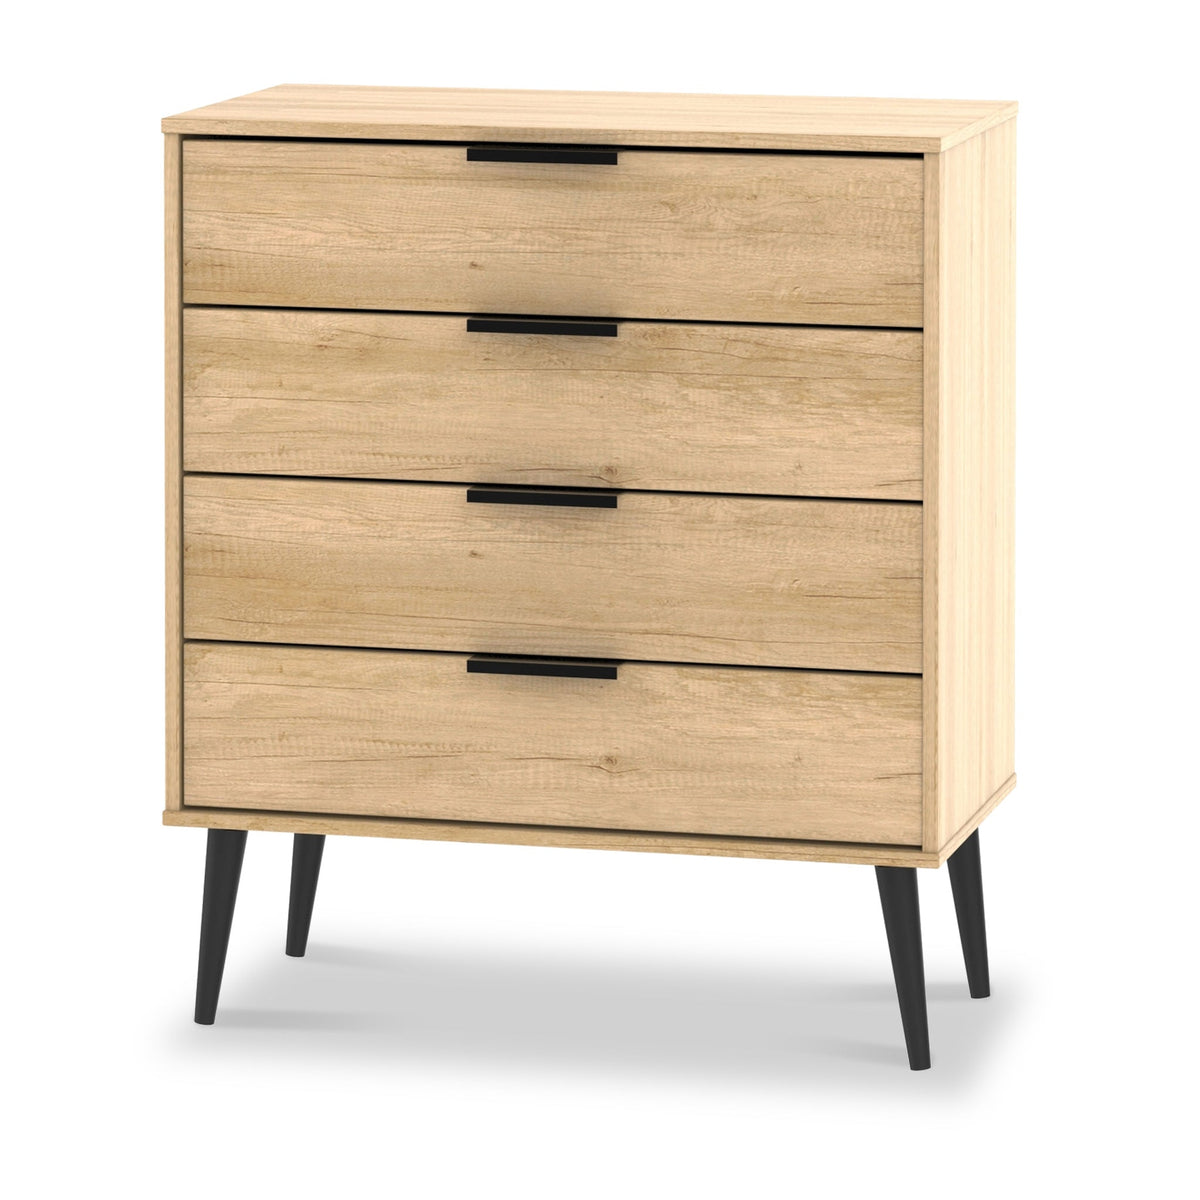 Asher Light Oak 4 Drawer Chest with black legs from Roseland Furniture